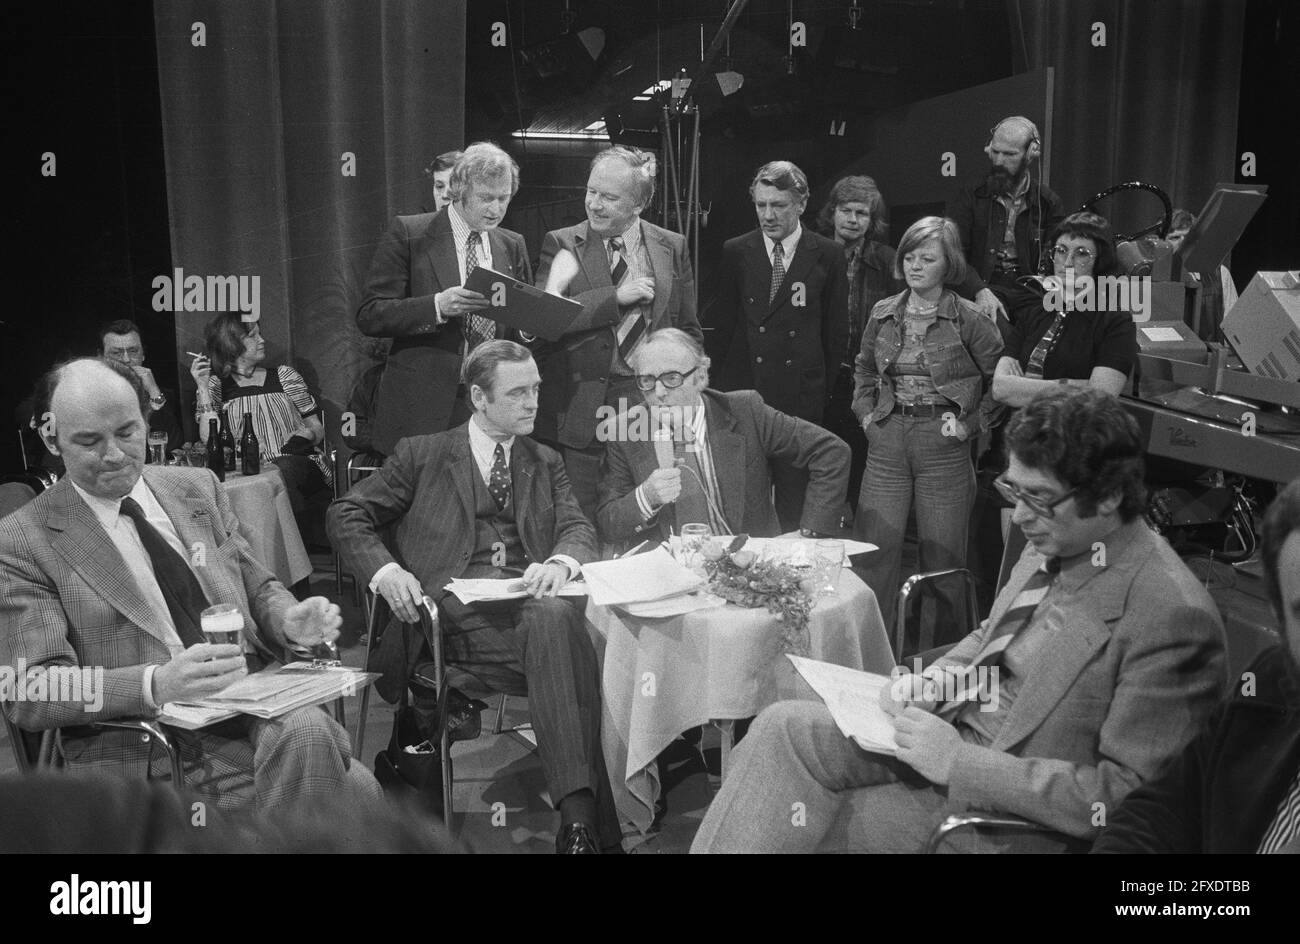 State elections; from left to right Aantjes ARP, De Brauw DS7 Van Thijn, above Andriessen KVP and Kruisinga CHU, March 27, 1974, elections, The Netherlands, 20th century press agency photo, news to remember, documentary, historic photography 1945-1990, visual stories, human history of the Twentieth Century, capturing moments in time Stock Photo